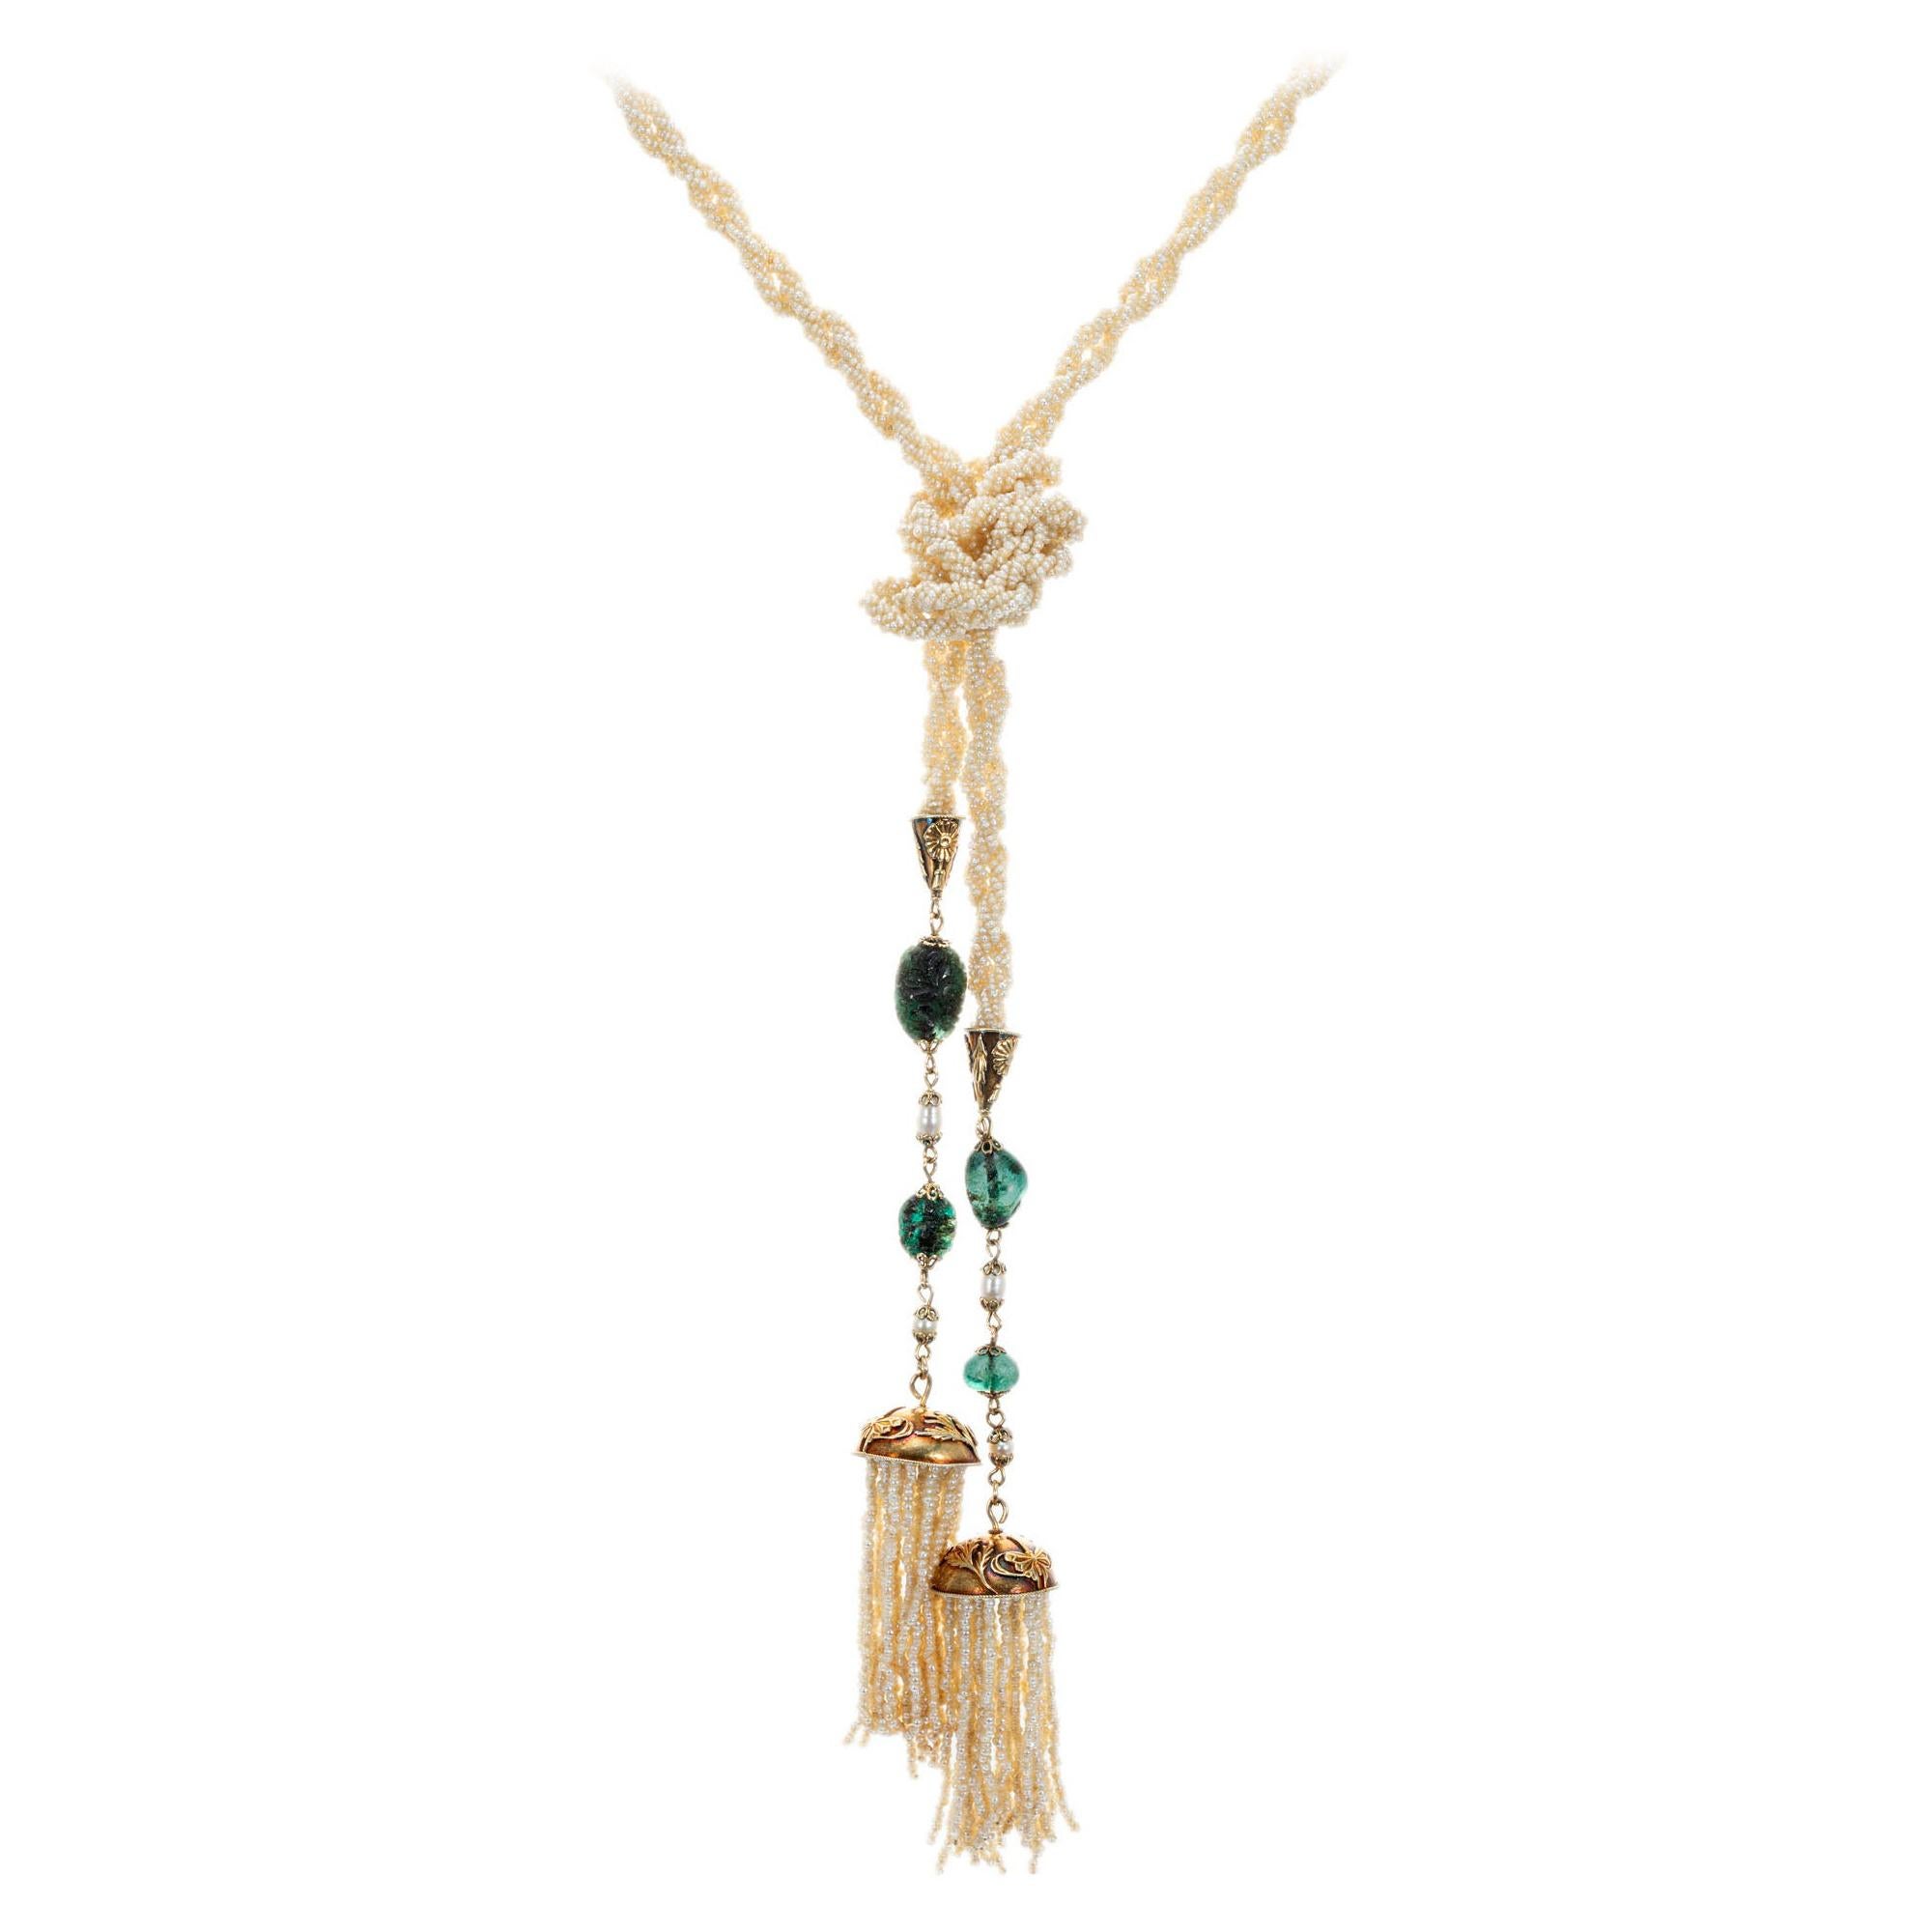 Original 1910 Art Nouveau multi-strand natural seed pearl emerald necklace. GIA Certified natural seed pearls of white color with a slight cream overtone, with four carved and freeform emeralds. 50 inches in length. 

2 carved dark green emerald